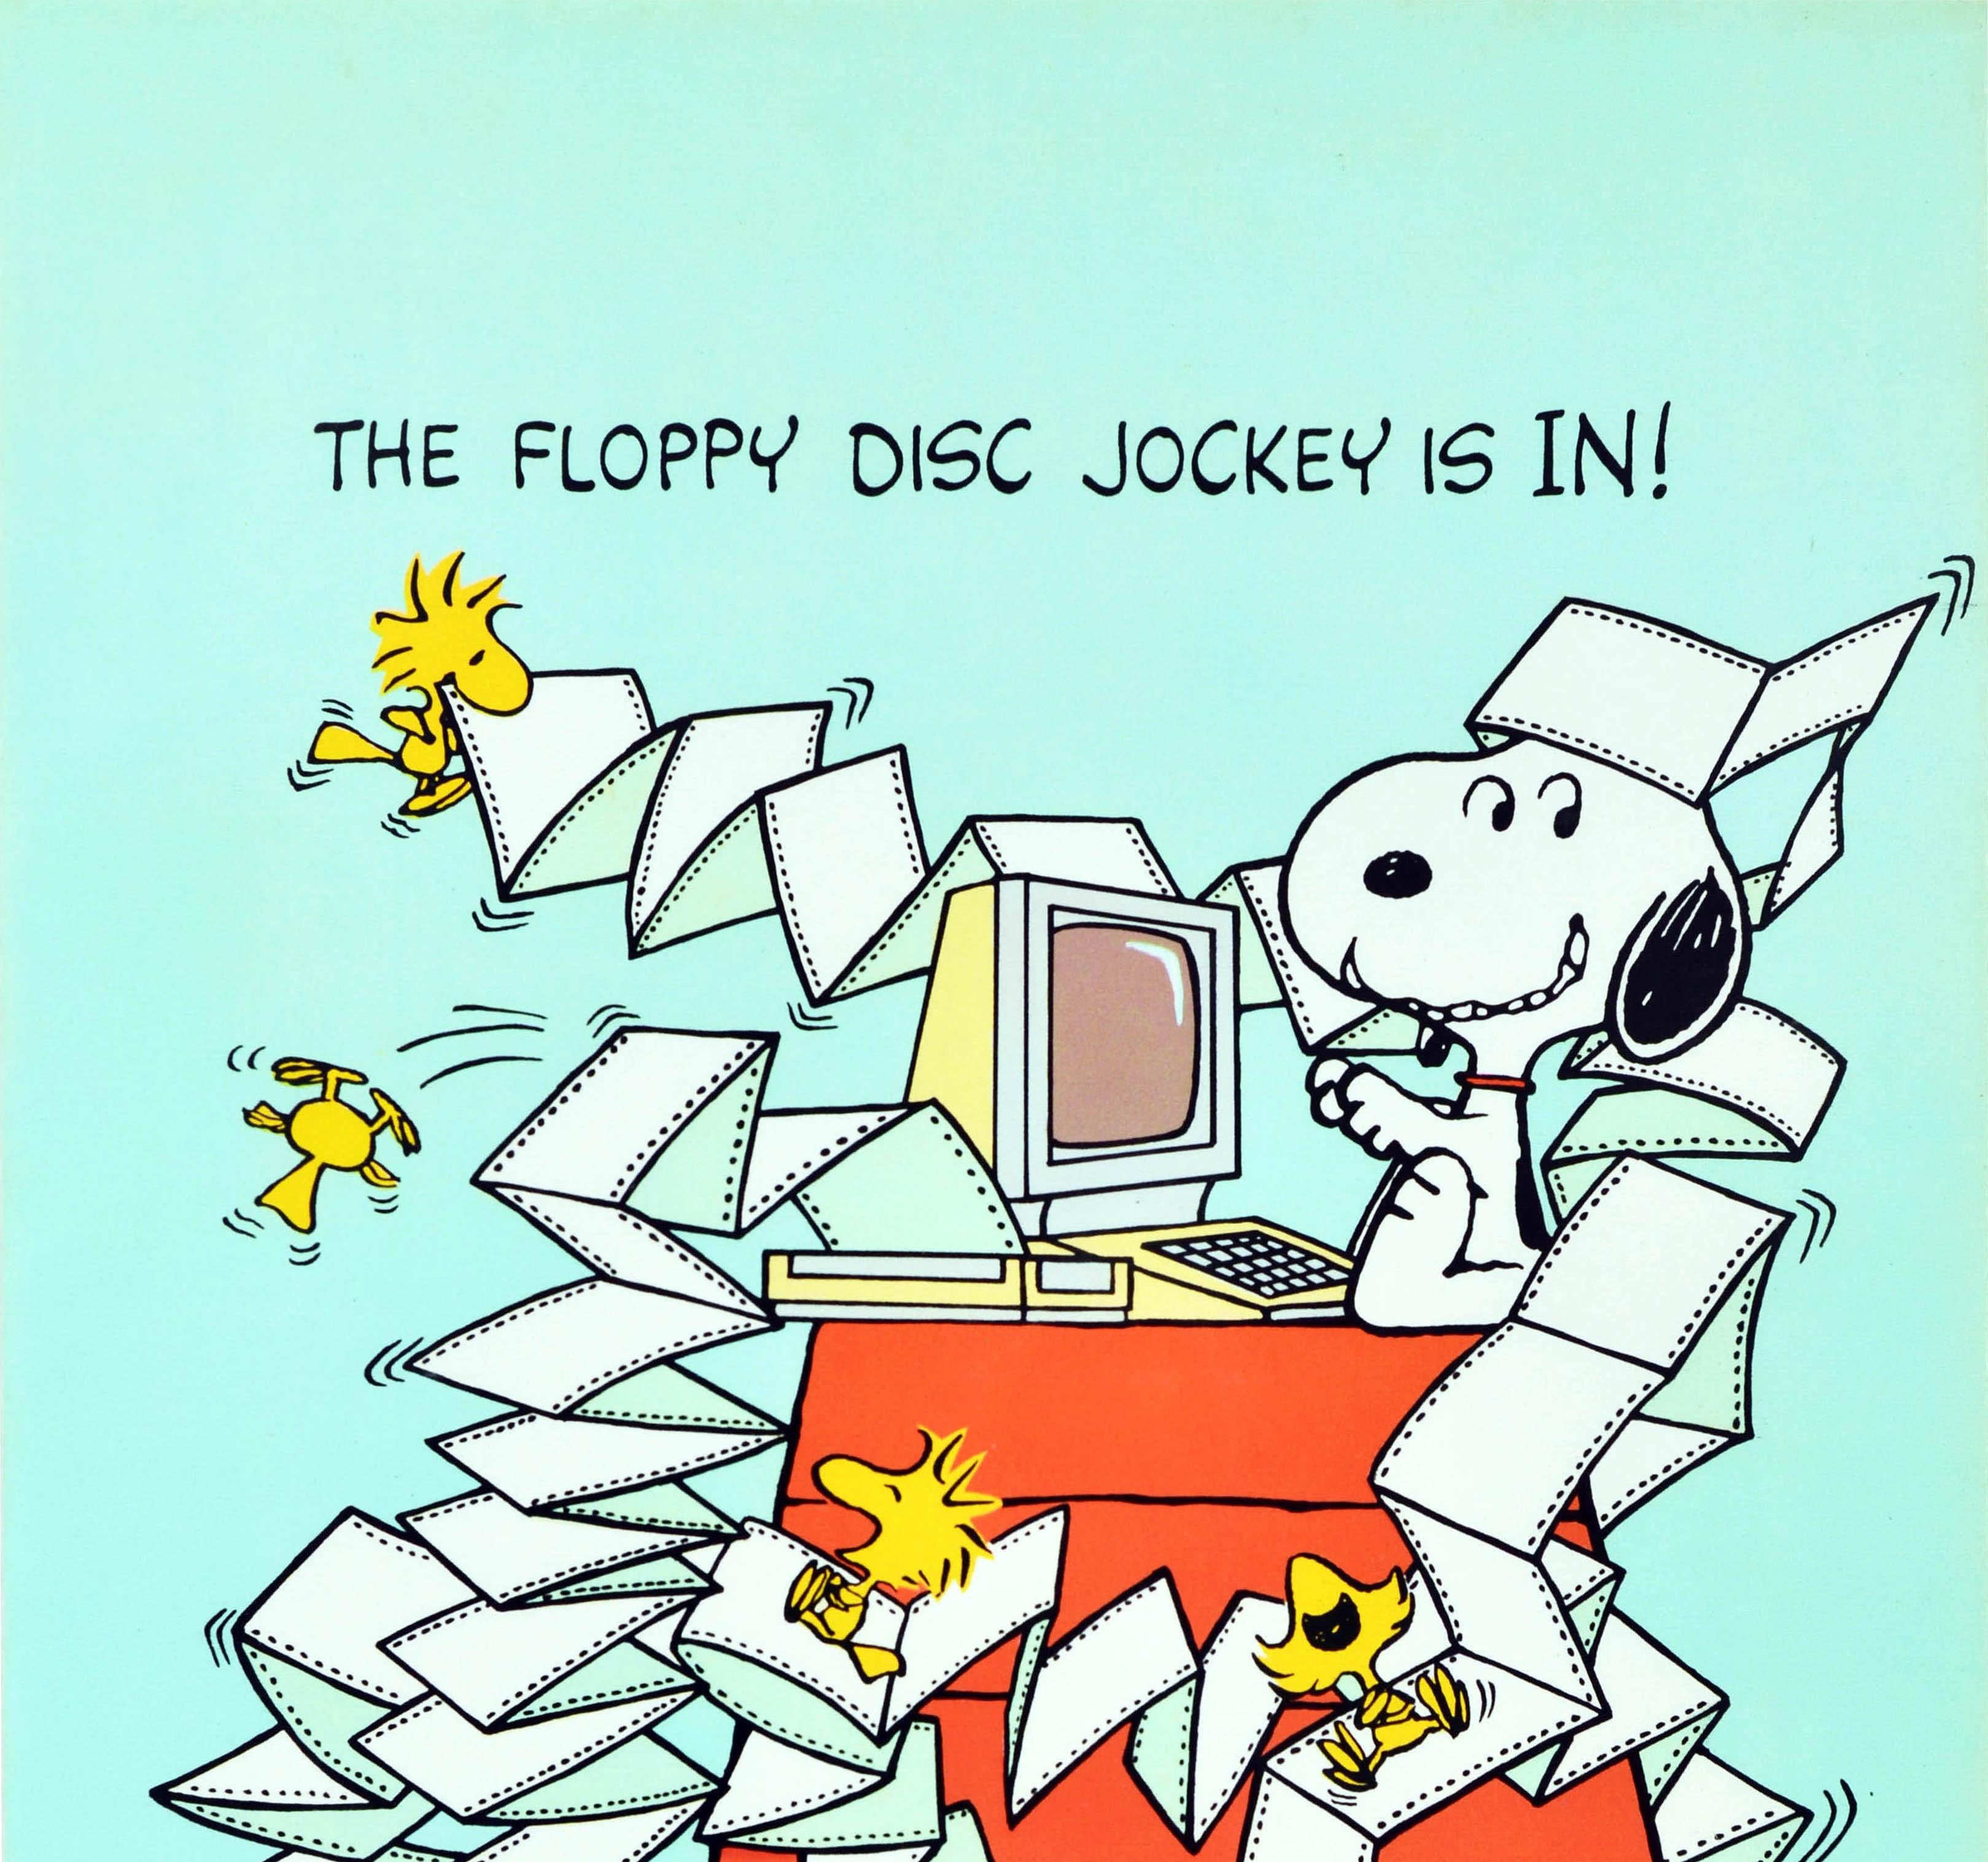 Original Vintage Snoopy Poster The Floppy Disc Jockey Is In! Woodstock Computer - Print by Charles M. Schulz